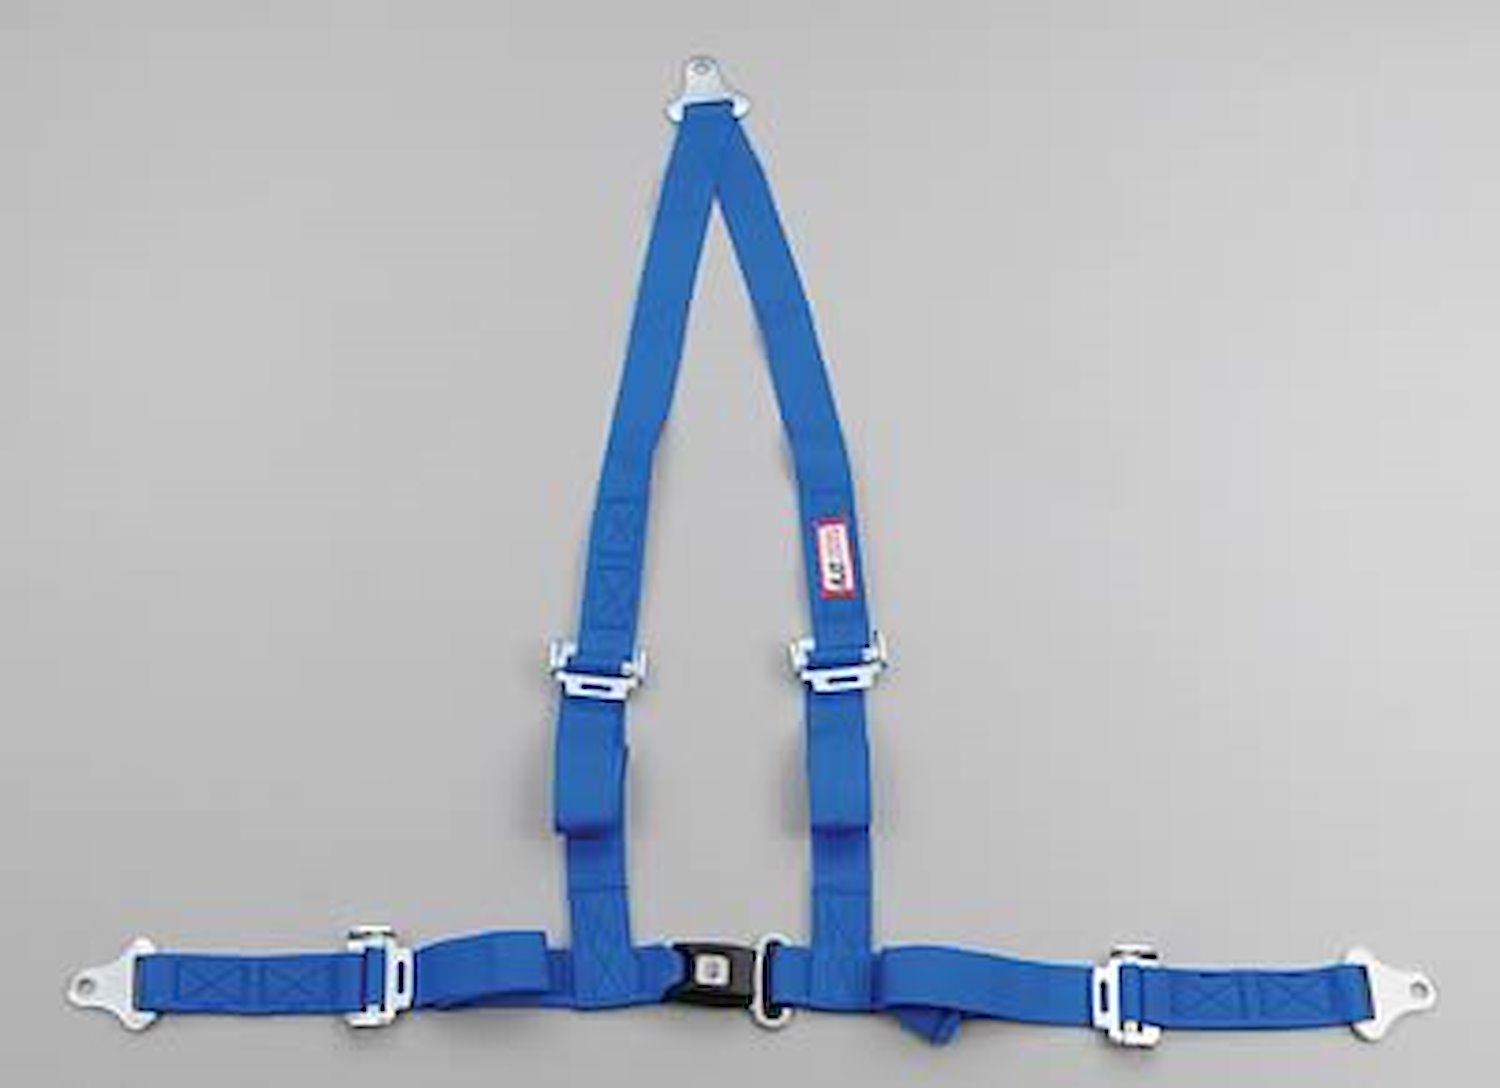 NON-SFI B&T HARNESS 2 PULL UP Lap Belt 2 S. H. V ROLL BAR Mount ALL SNAP ENDS BLUE